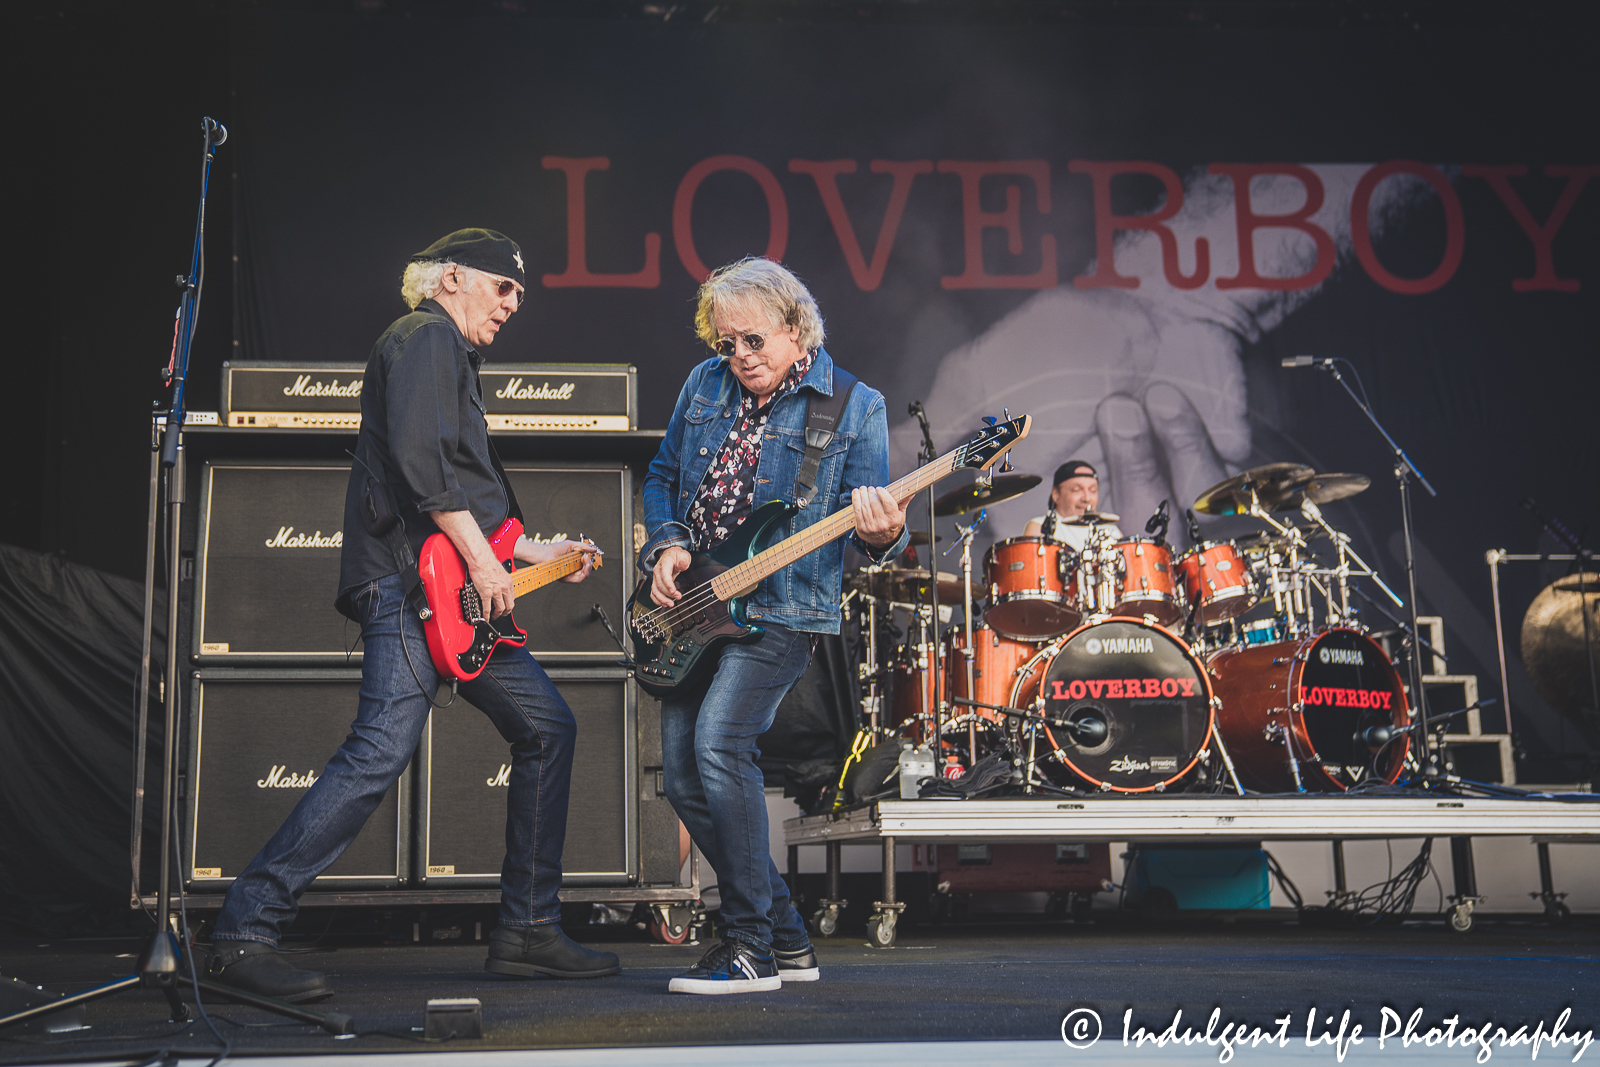 Loverboy band members Paul Dean, Ken "Spider" Sinnaeve and Matt Frenette live in concert together at Starlight Theatre in Kansas City, MO on July 18, 2023.